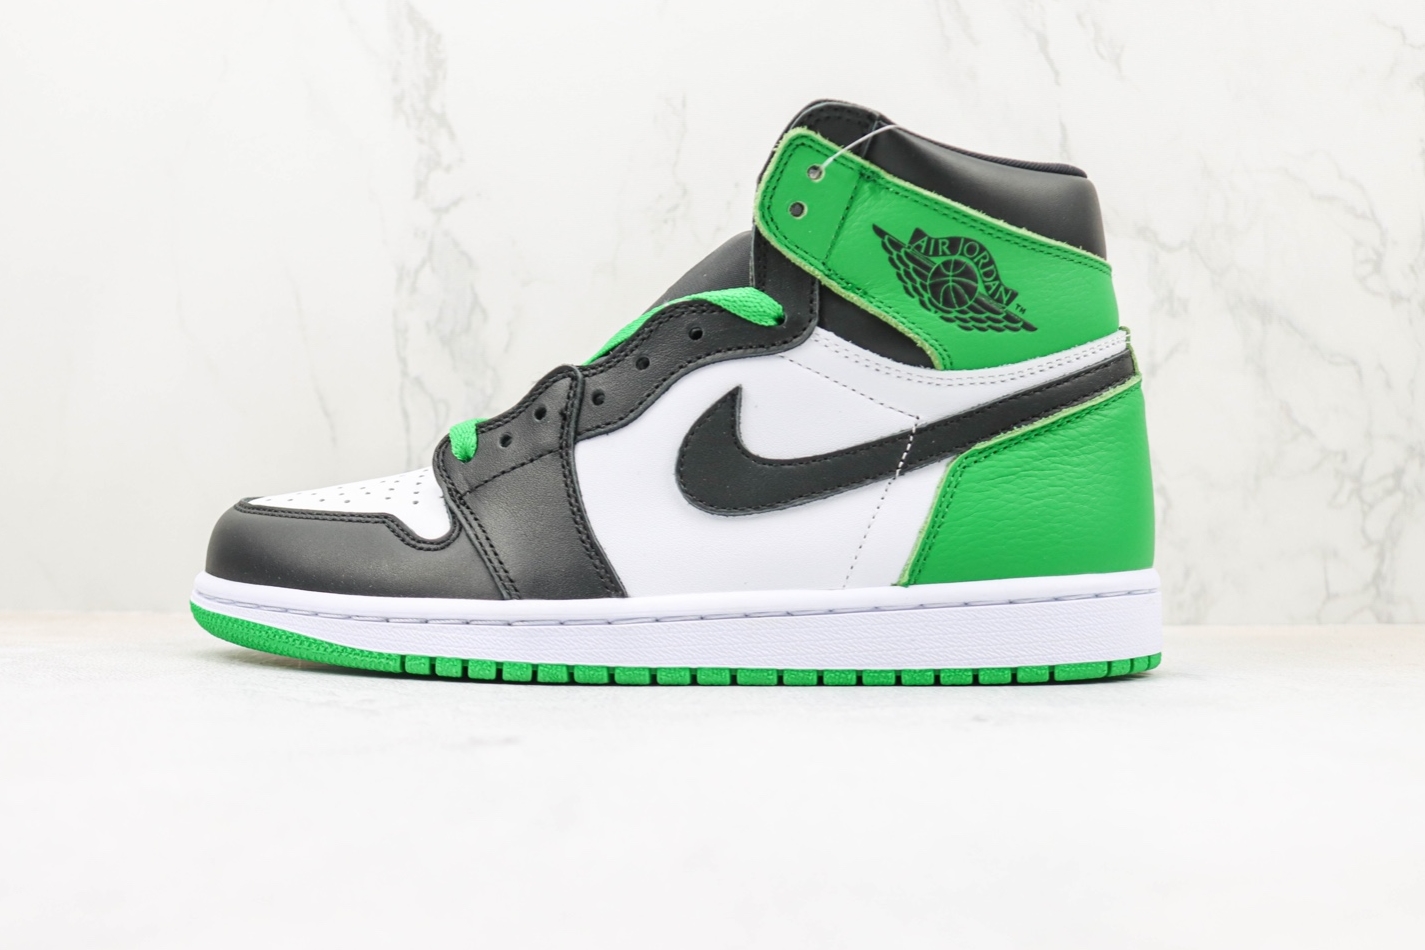 Air Jordan 1 Retro High OG 'Lucky Green' DZ5485-031 - Authentic Sneakers for Sale